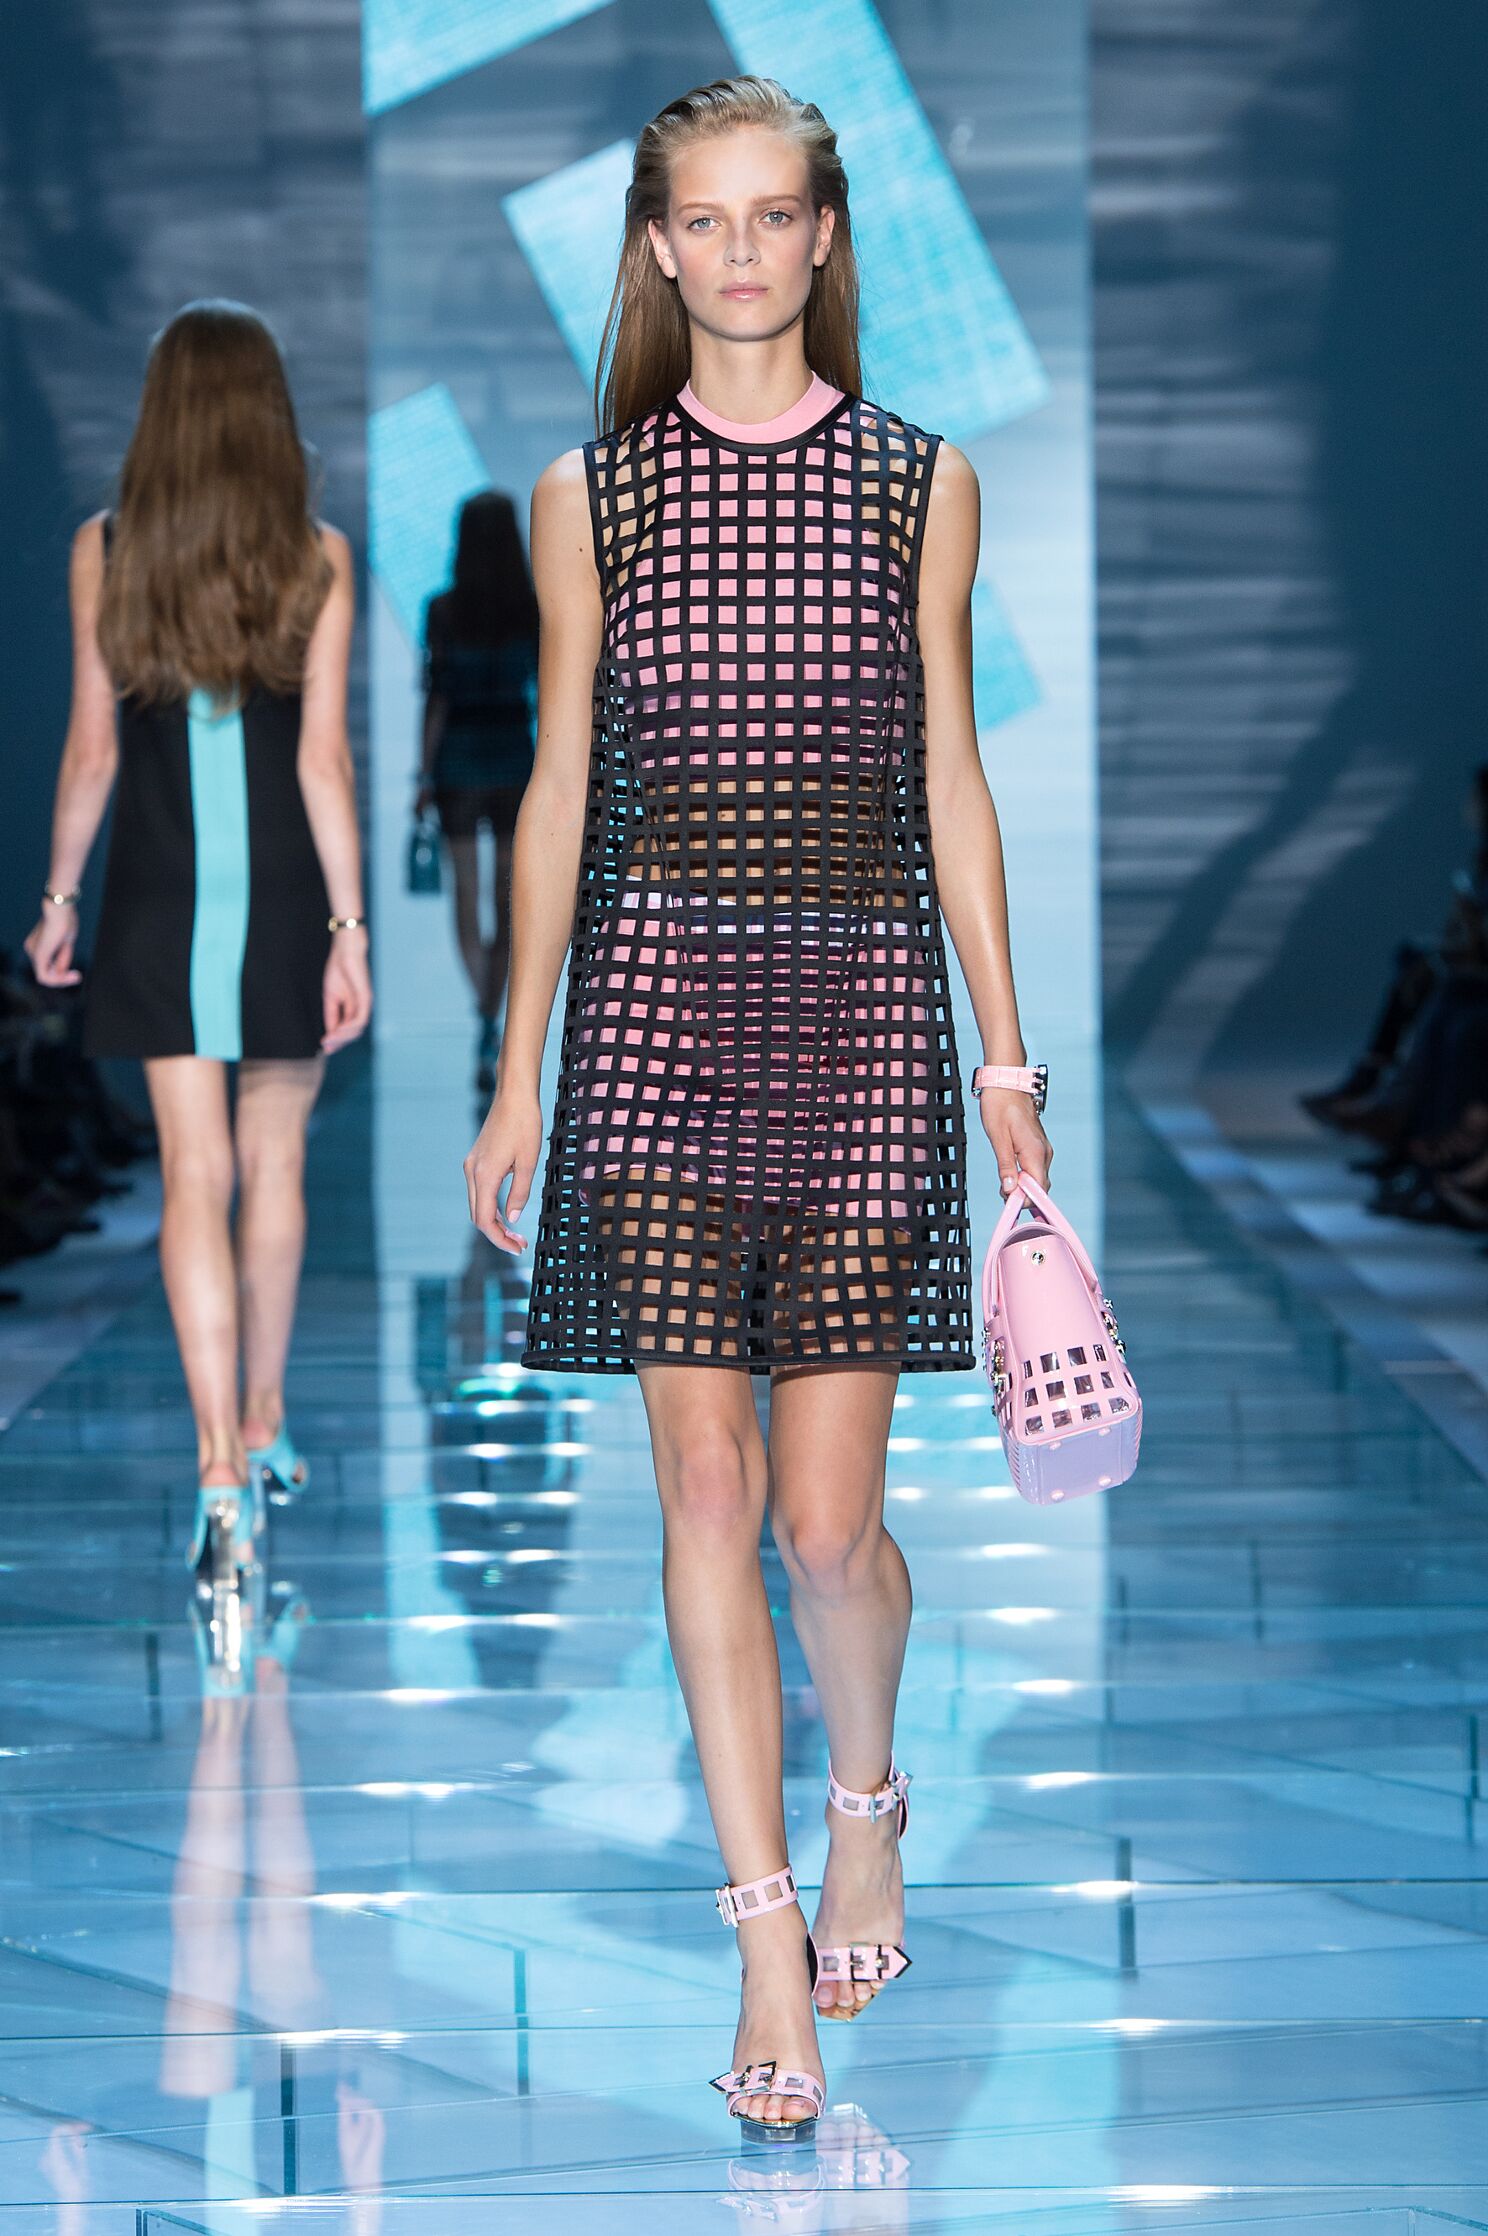 VERSACE SPRING SUMMER 2015 WOMEN’S COLLECTION | The Skinny ...